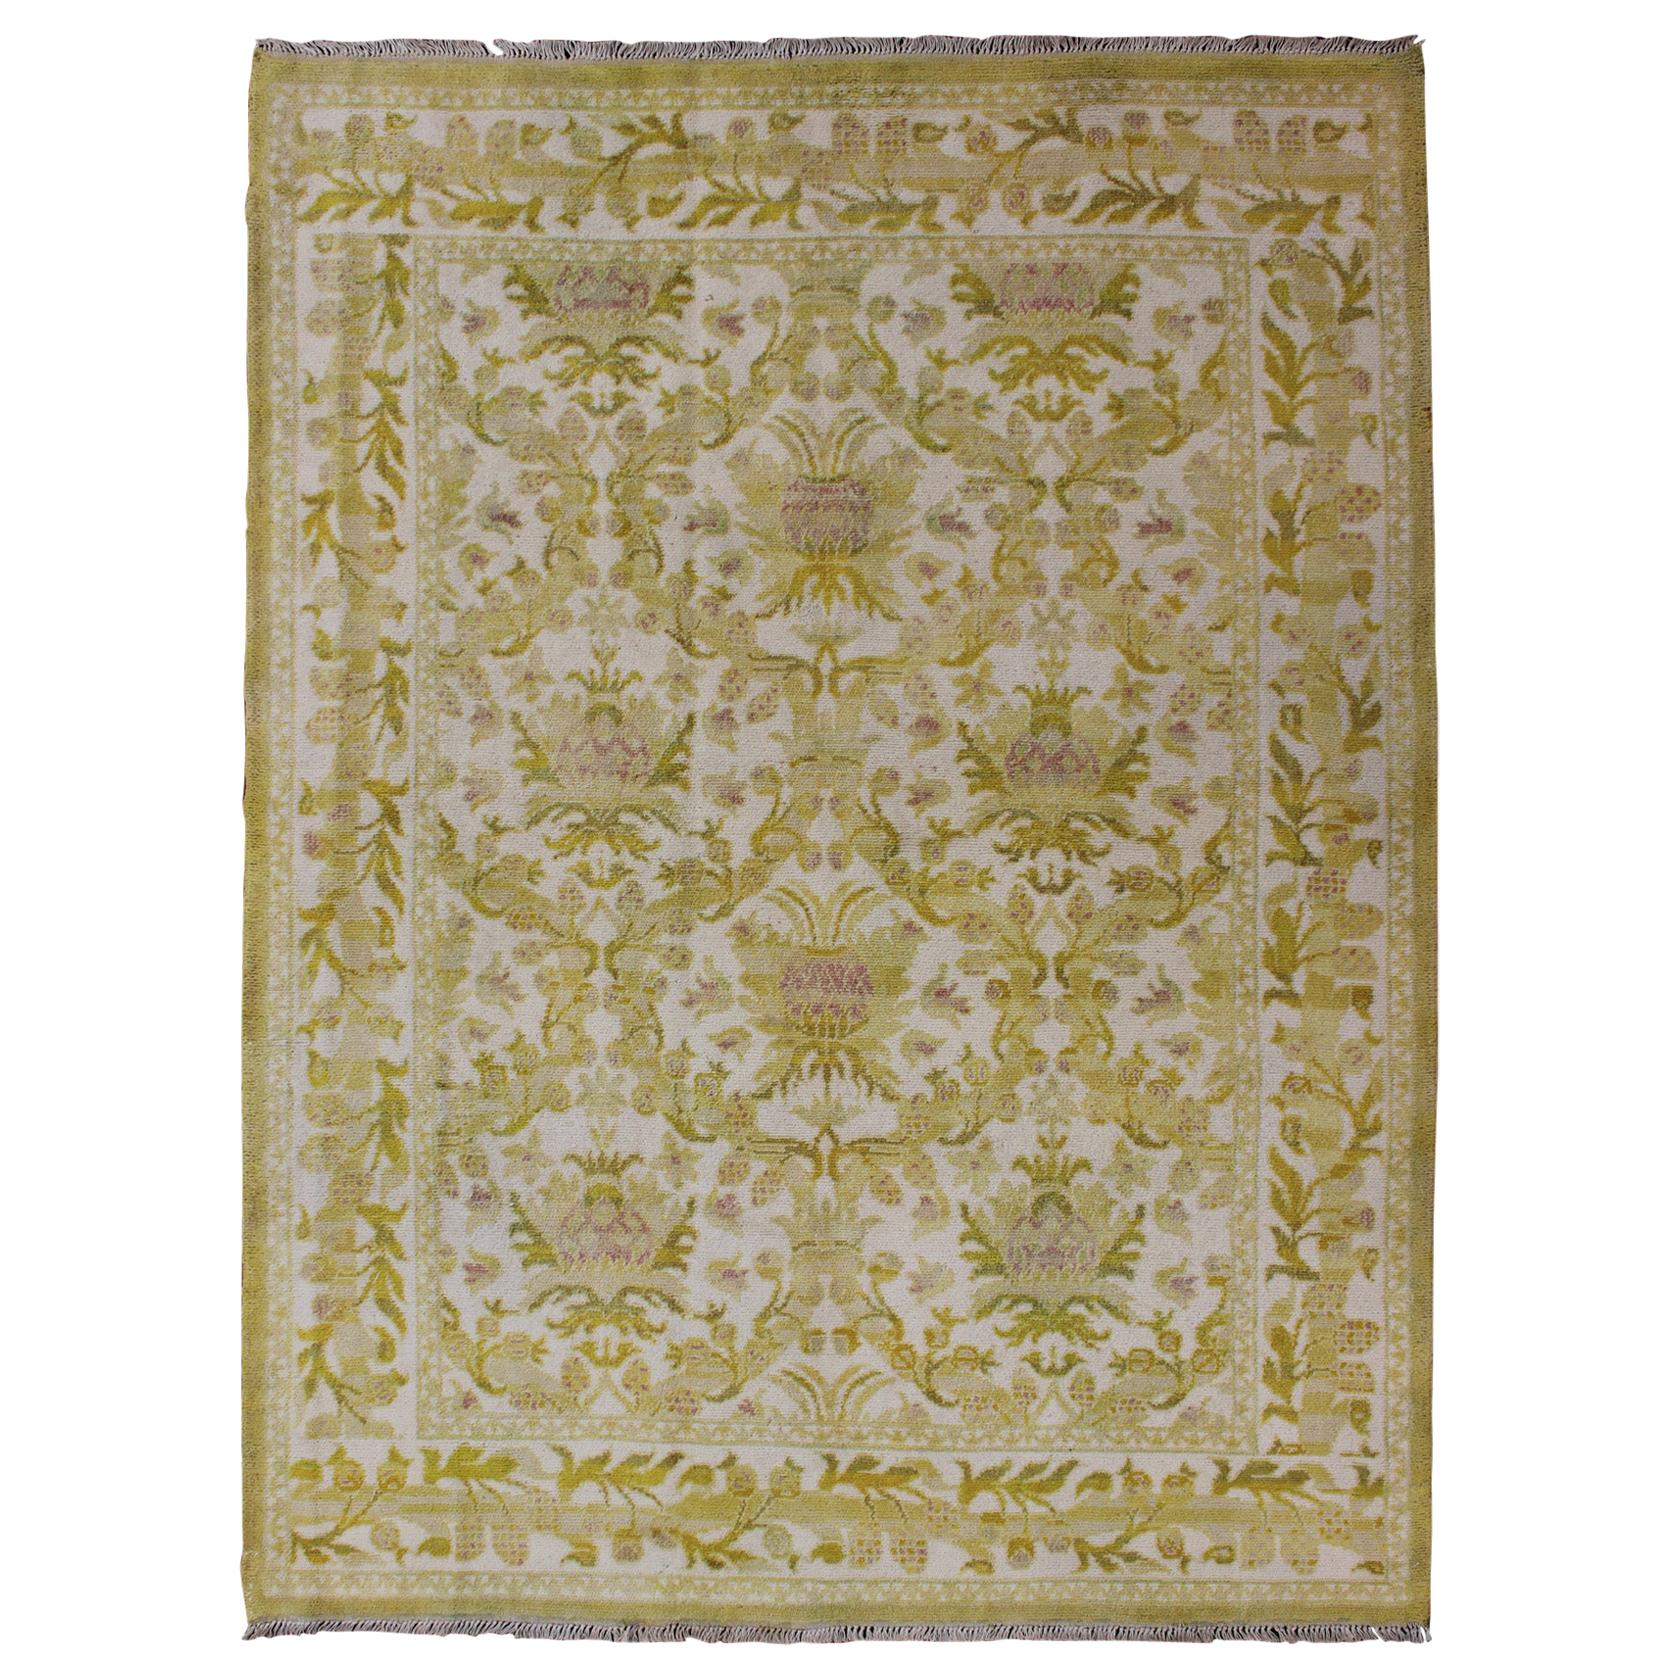 Elegant Spanish Rug with Floral Design in Golden-Green, Acid Green and White